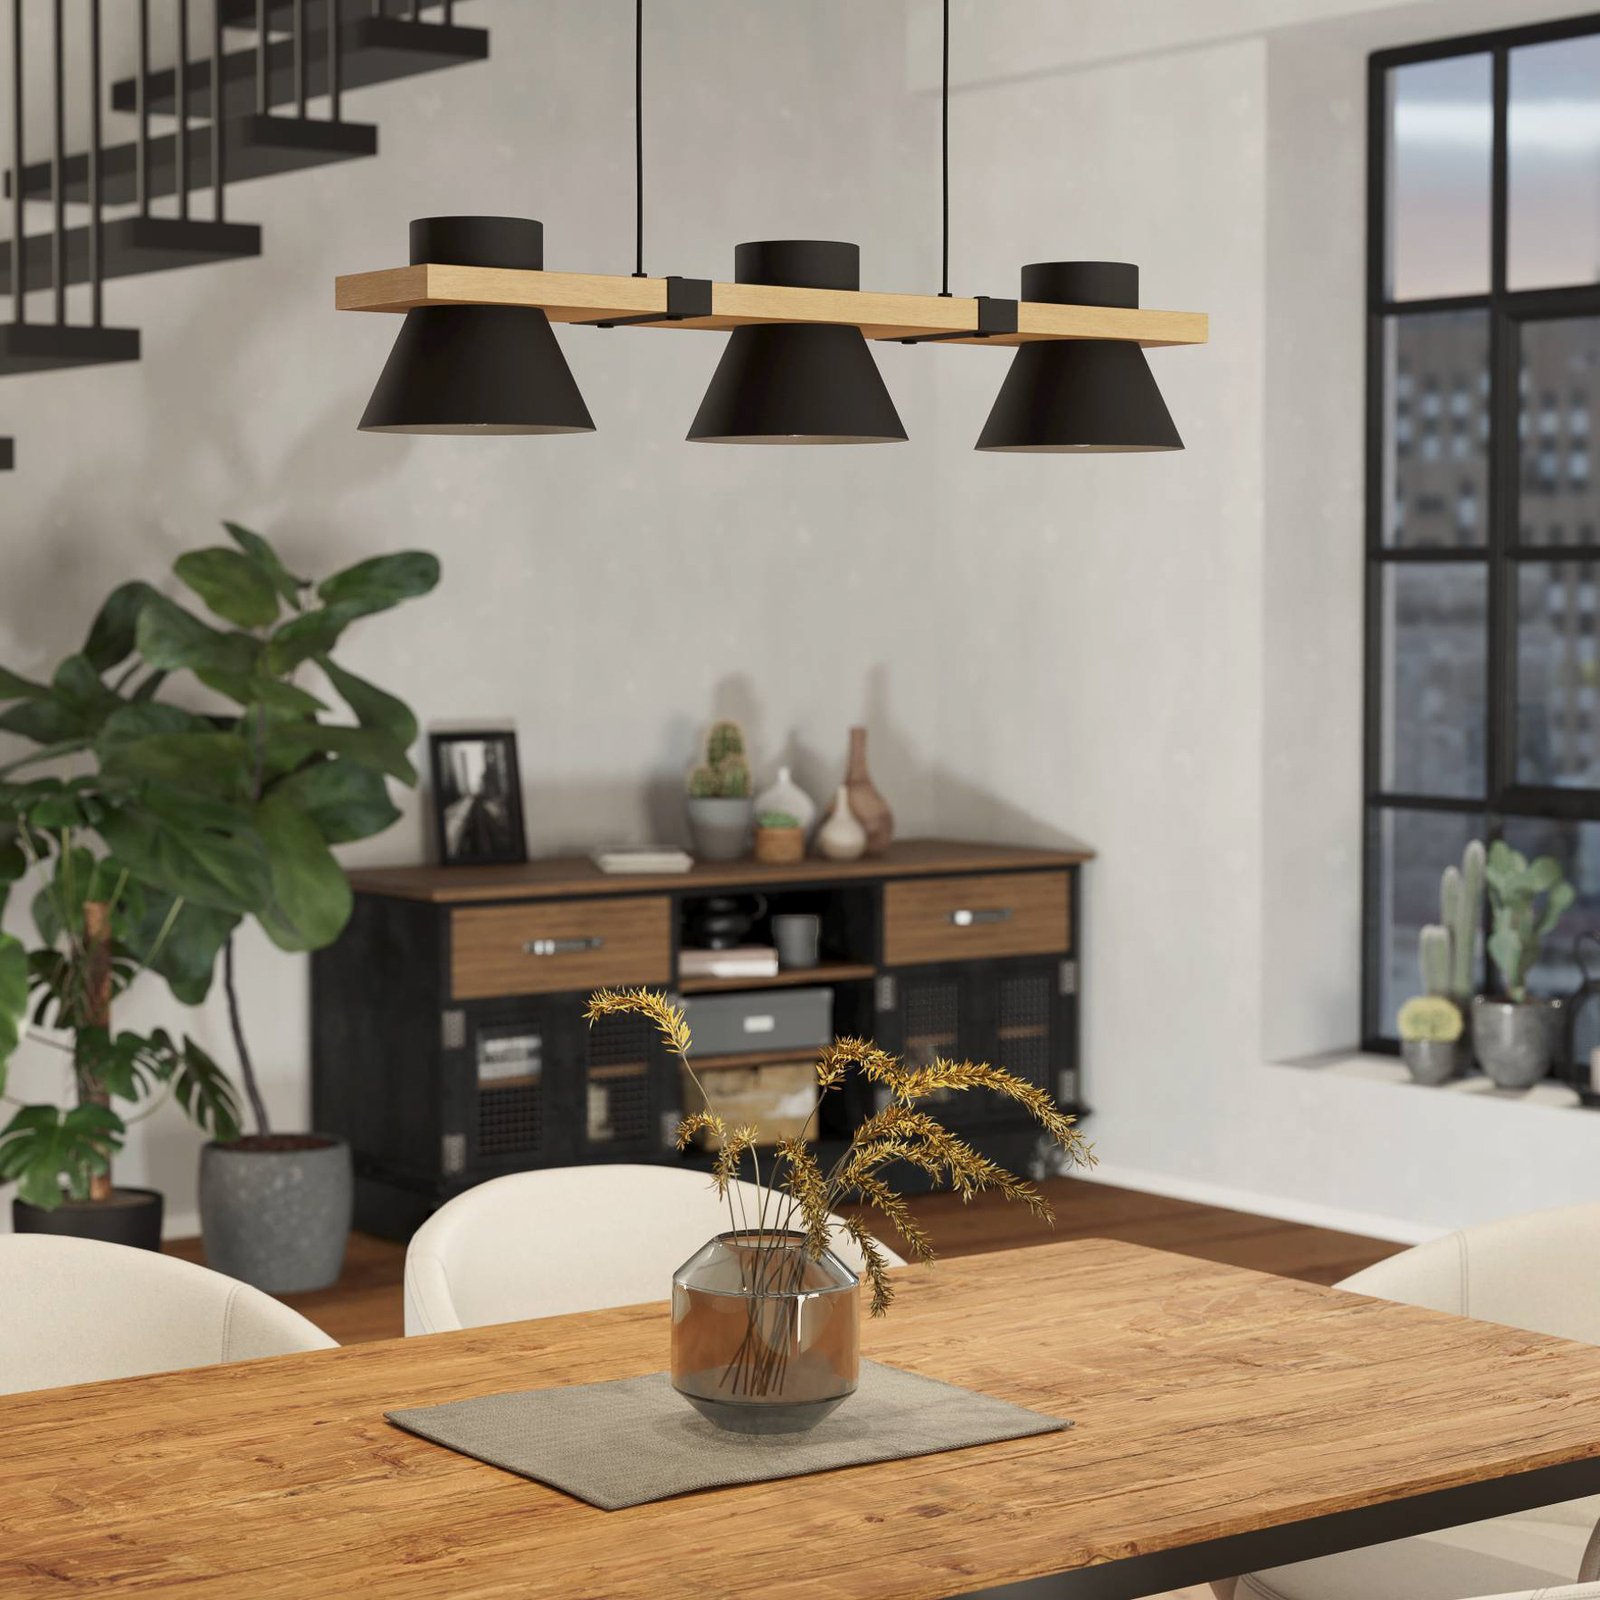 Maccles pendant light in black with wood, 3-bulb